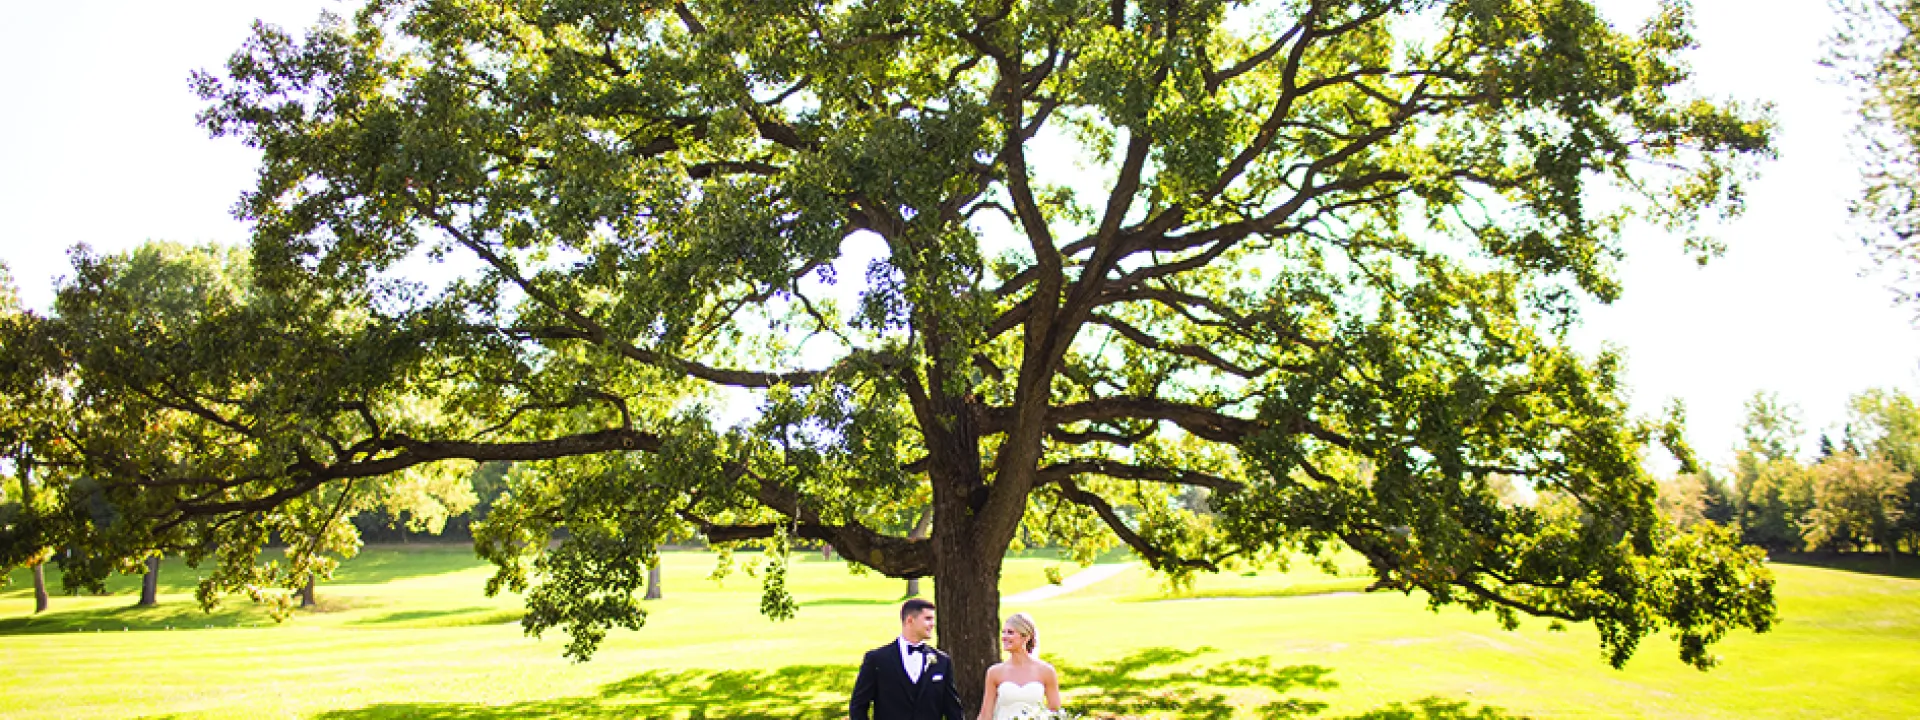 Jake and Paige hold hands in front of a tree during their wedding at the Wayzata Country Club,